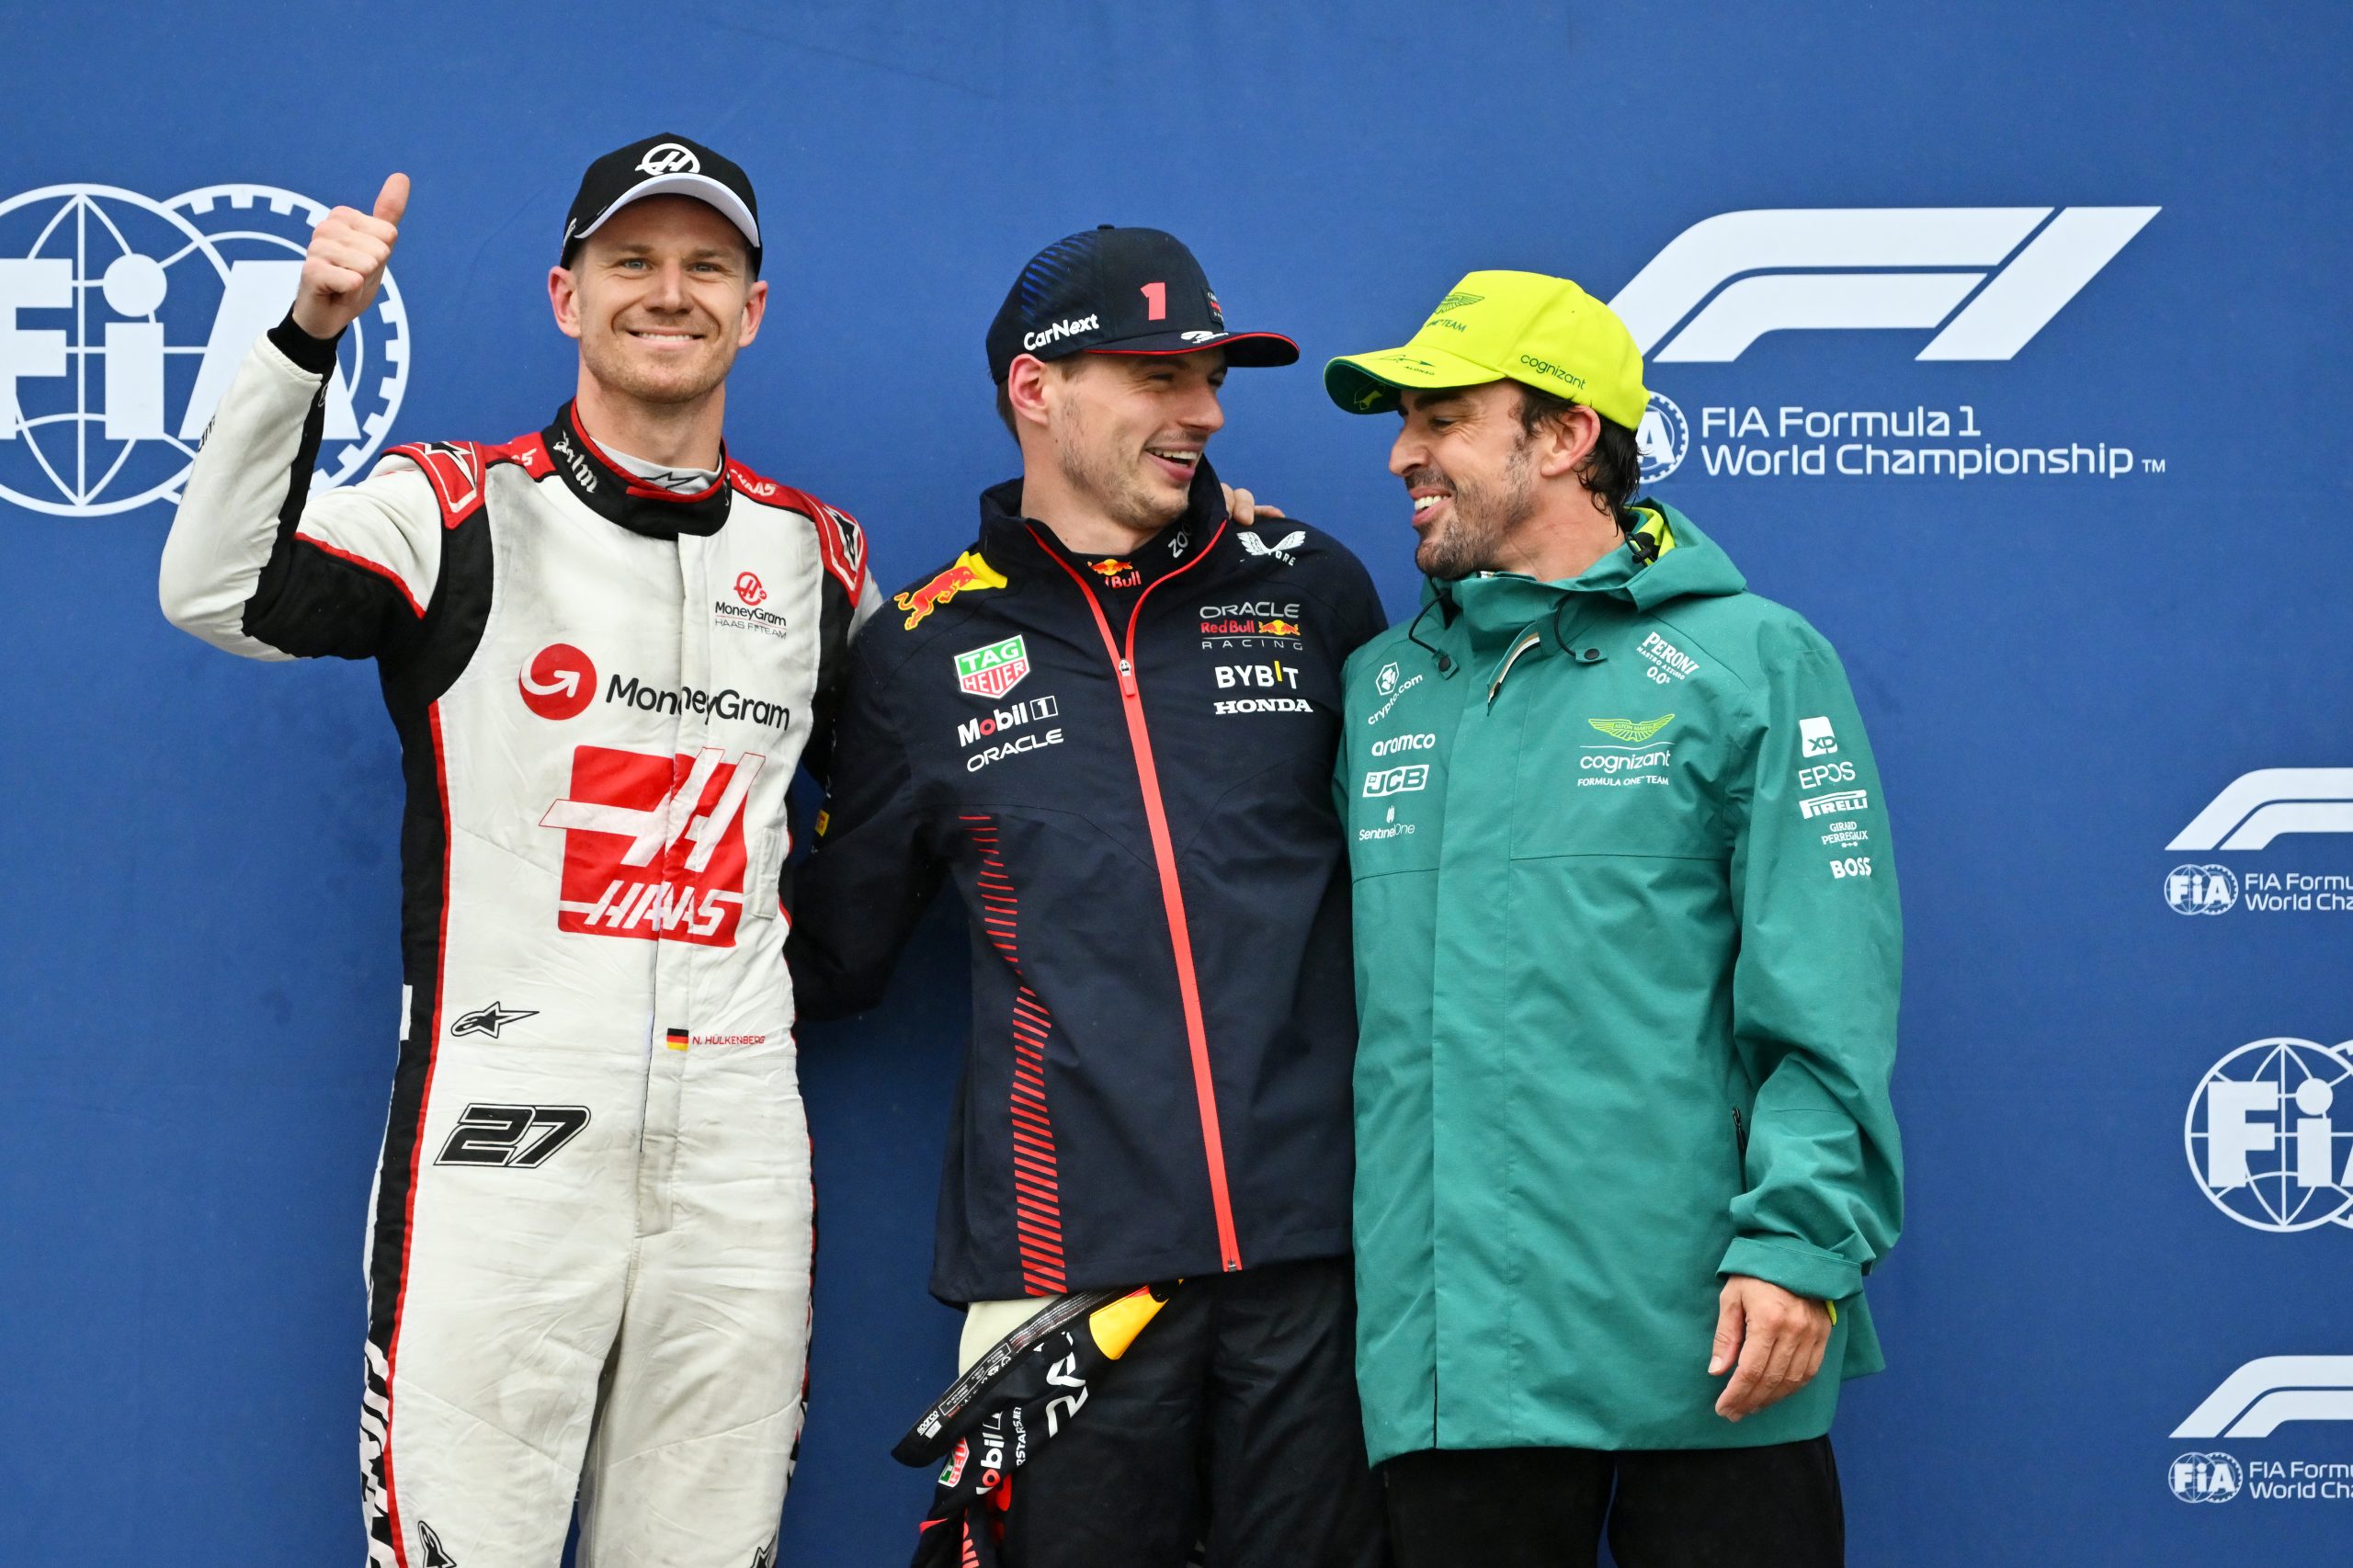 Pole position qualifier Max Verstappen of the Netherlands and Oracle Red Bull Racing (C), Second placed qualifier Nico Hulkenberg of Germany and Haas F1 (L) and Third placed qualifier Fernando Alonso of Spain and Aston Martin F1 Team (R) pose for a photo in the Pitlane during qualifying ahead of the F1 Grand Prix of Canada at Circuit Gilles Villeneuve on June 17, 2023 in Montreal, Quebec. (Photo by Dan Mullan/Getty Images)